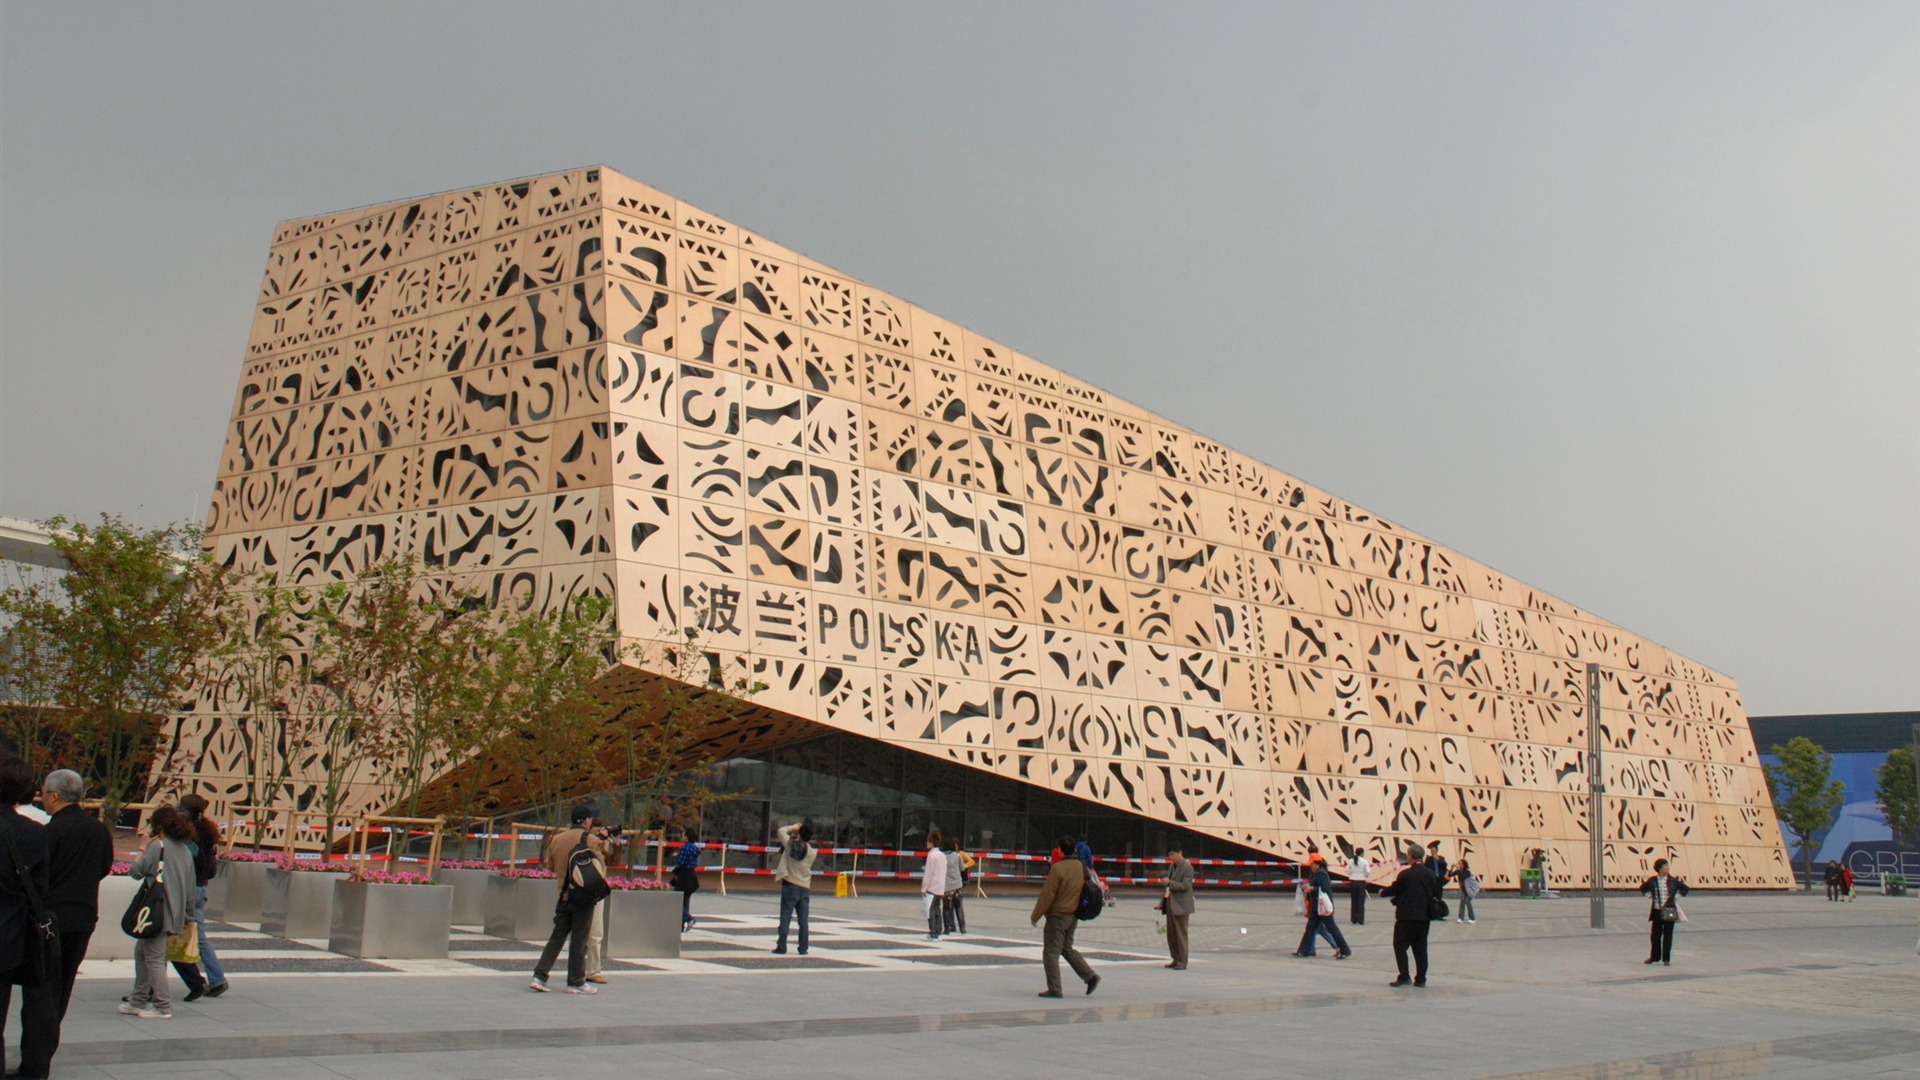 Commissioning of the 2010 Shanghai World Expo (studious works) #25 - 1920x1080